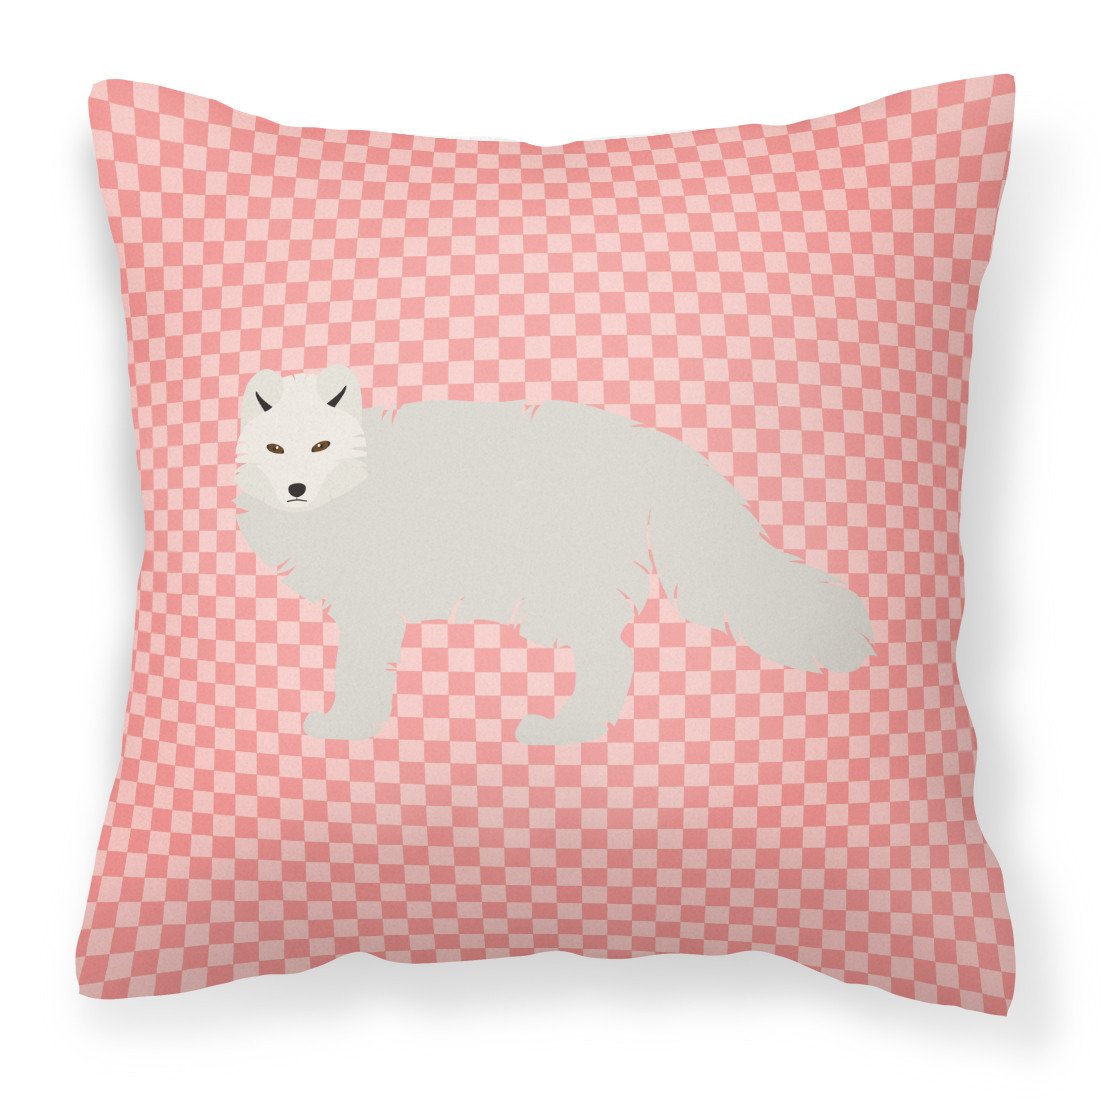 White Arctic Fox Pink Check Fabric Decorative Pillow BB7877PW1818 by Caroline's Treasures